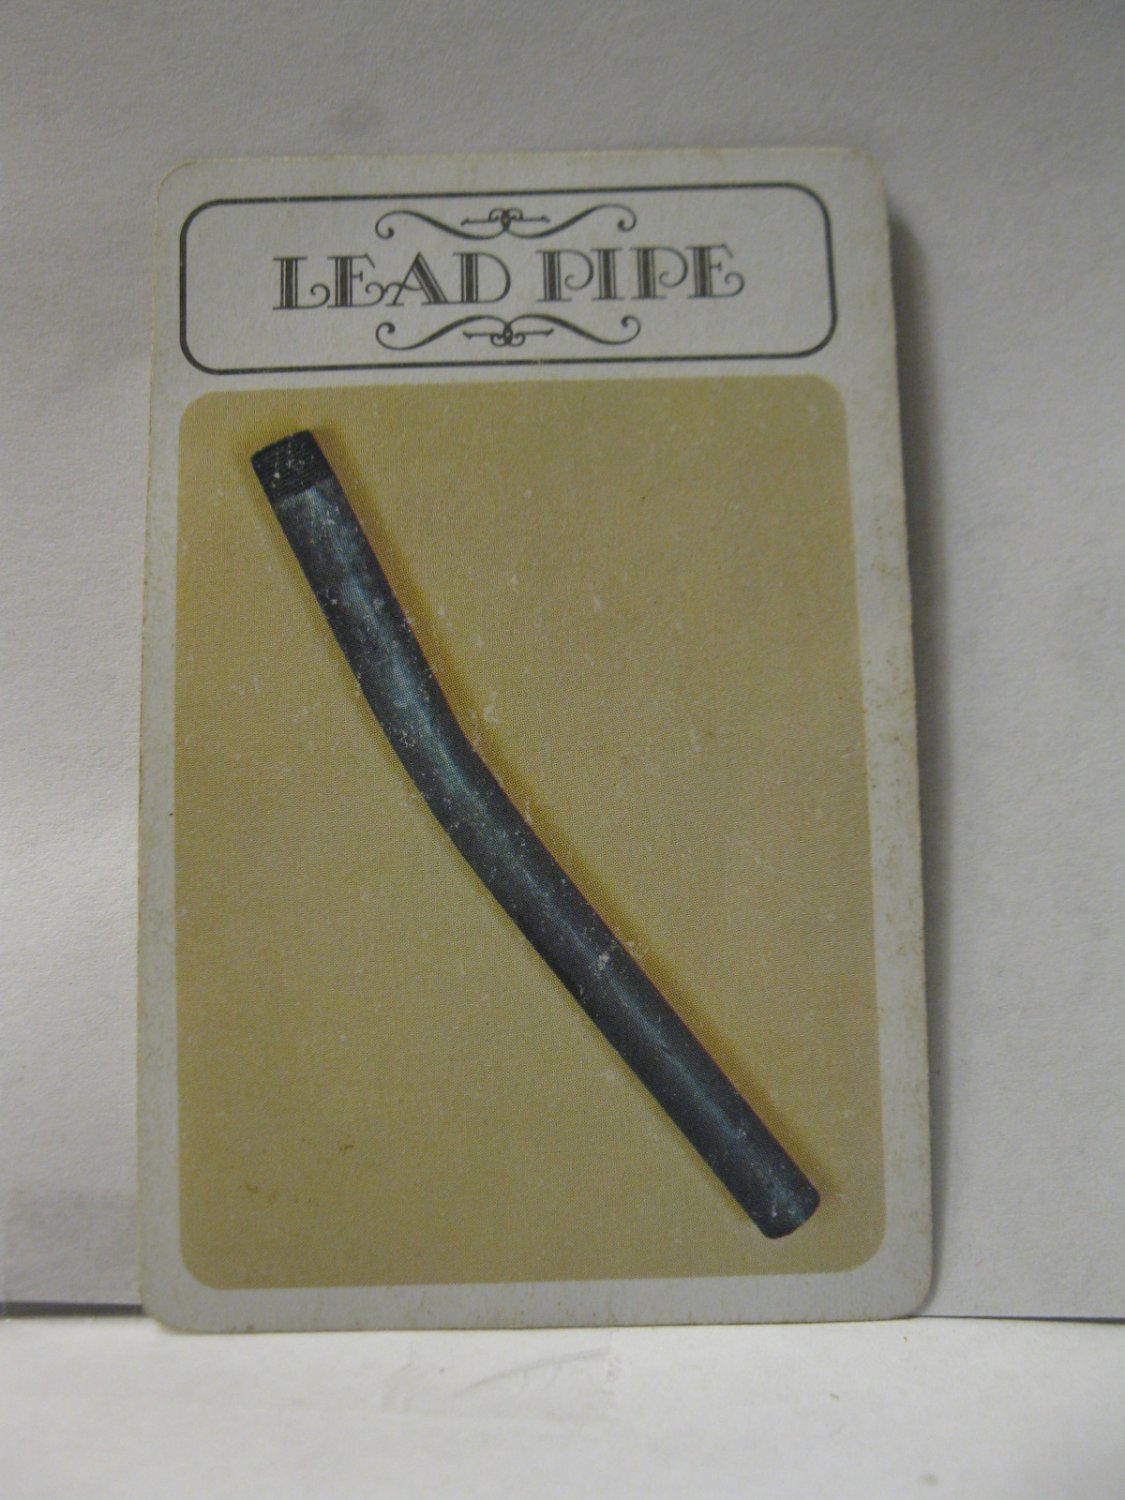 1979 Clue Board Game Piece: Lead Pipe Weapon Card